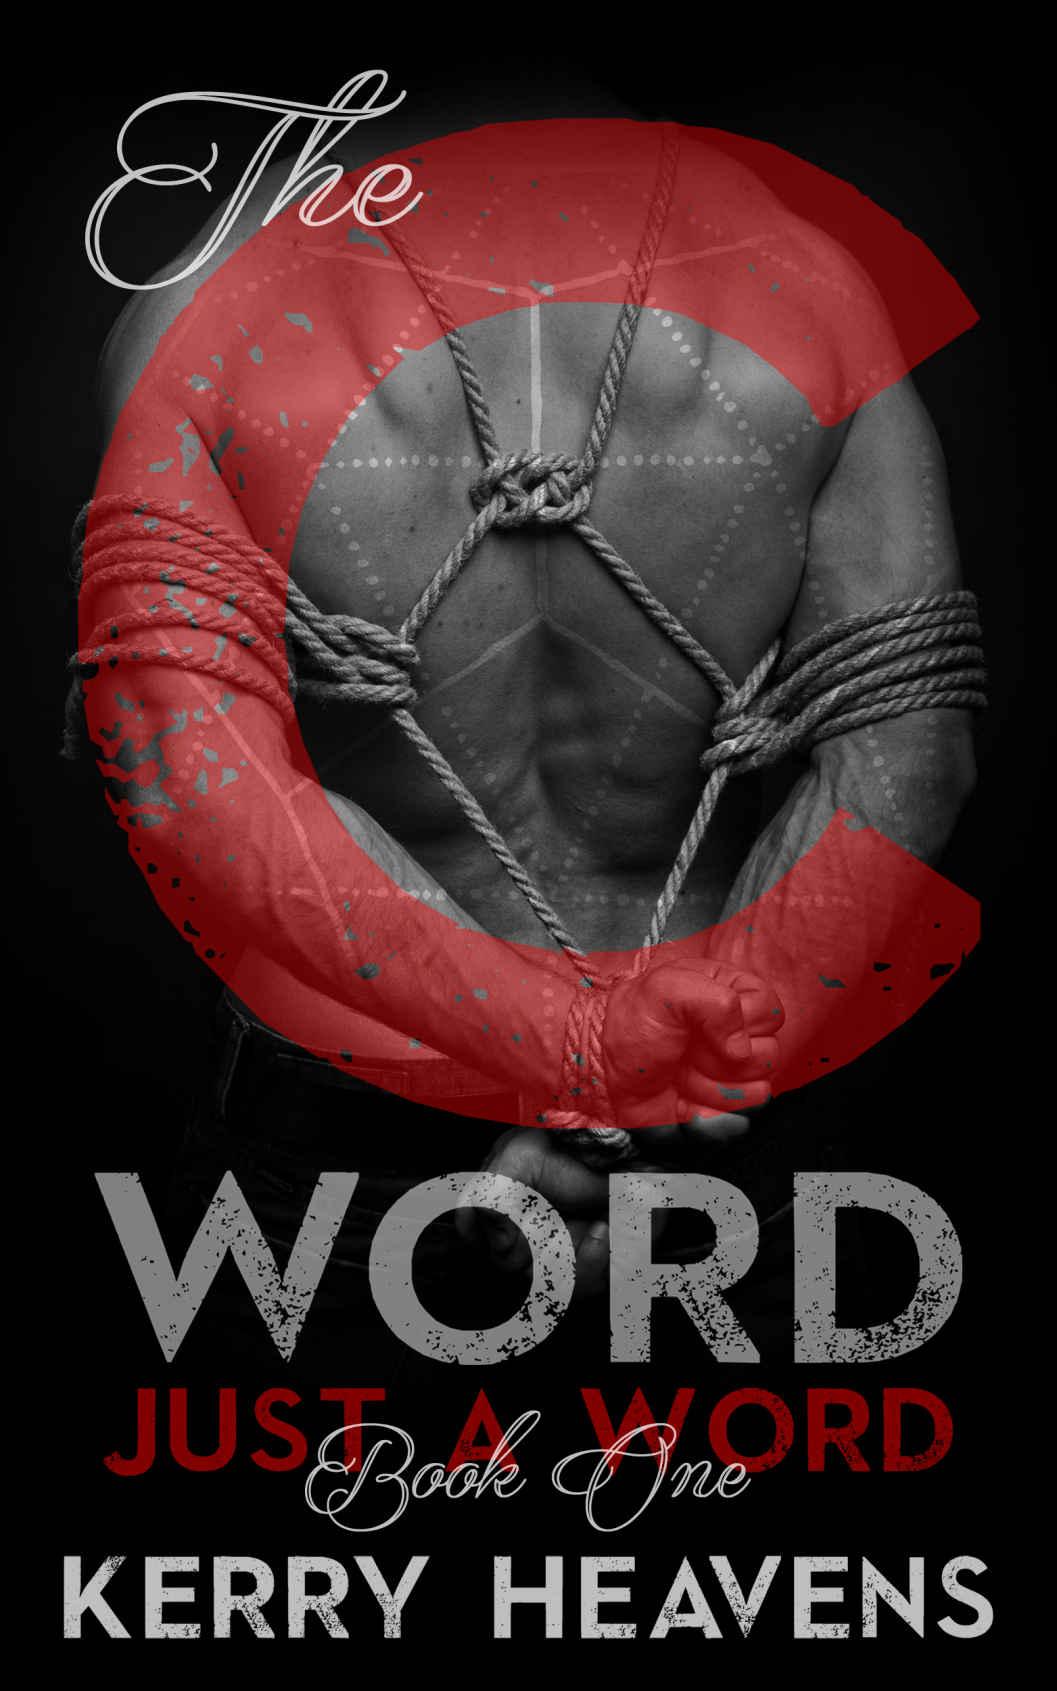 The C Word (Just a Word Book 1)